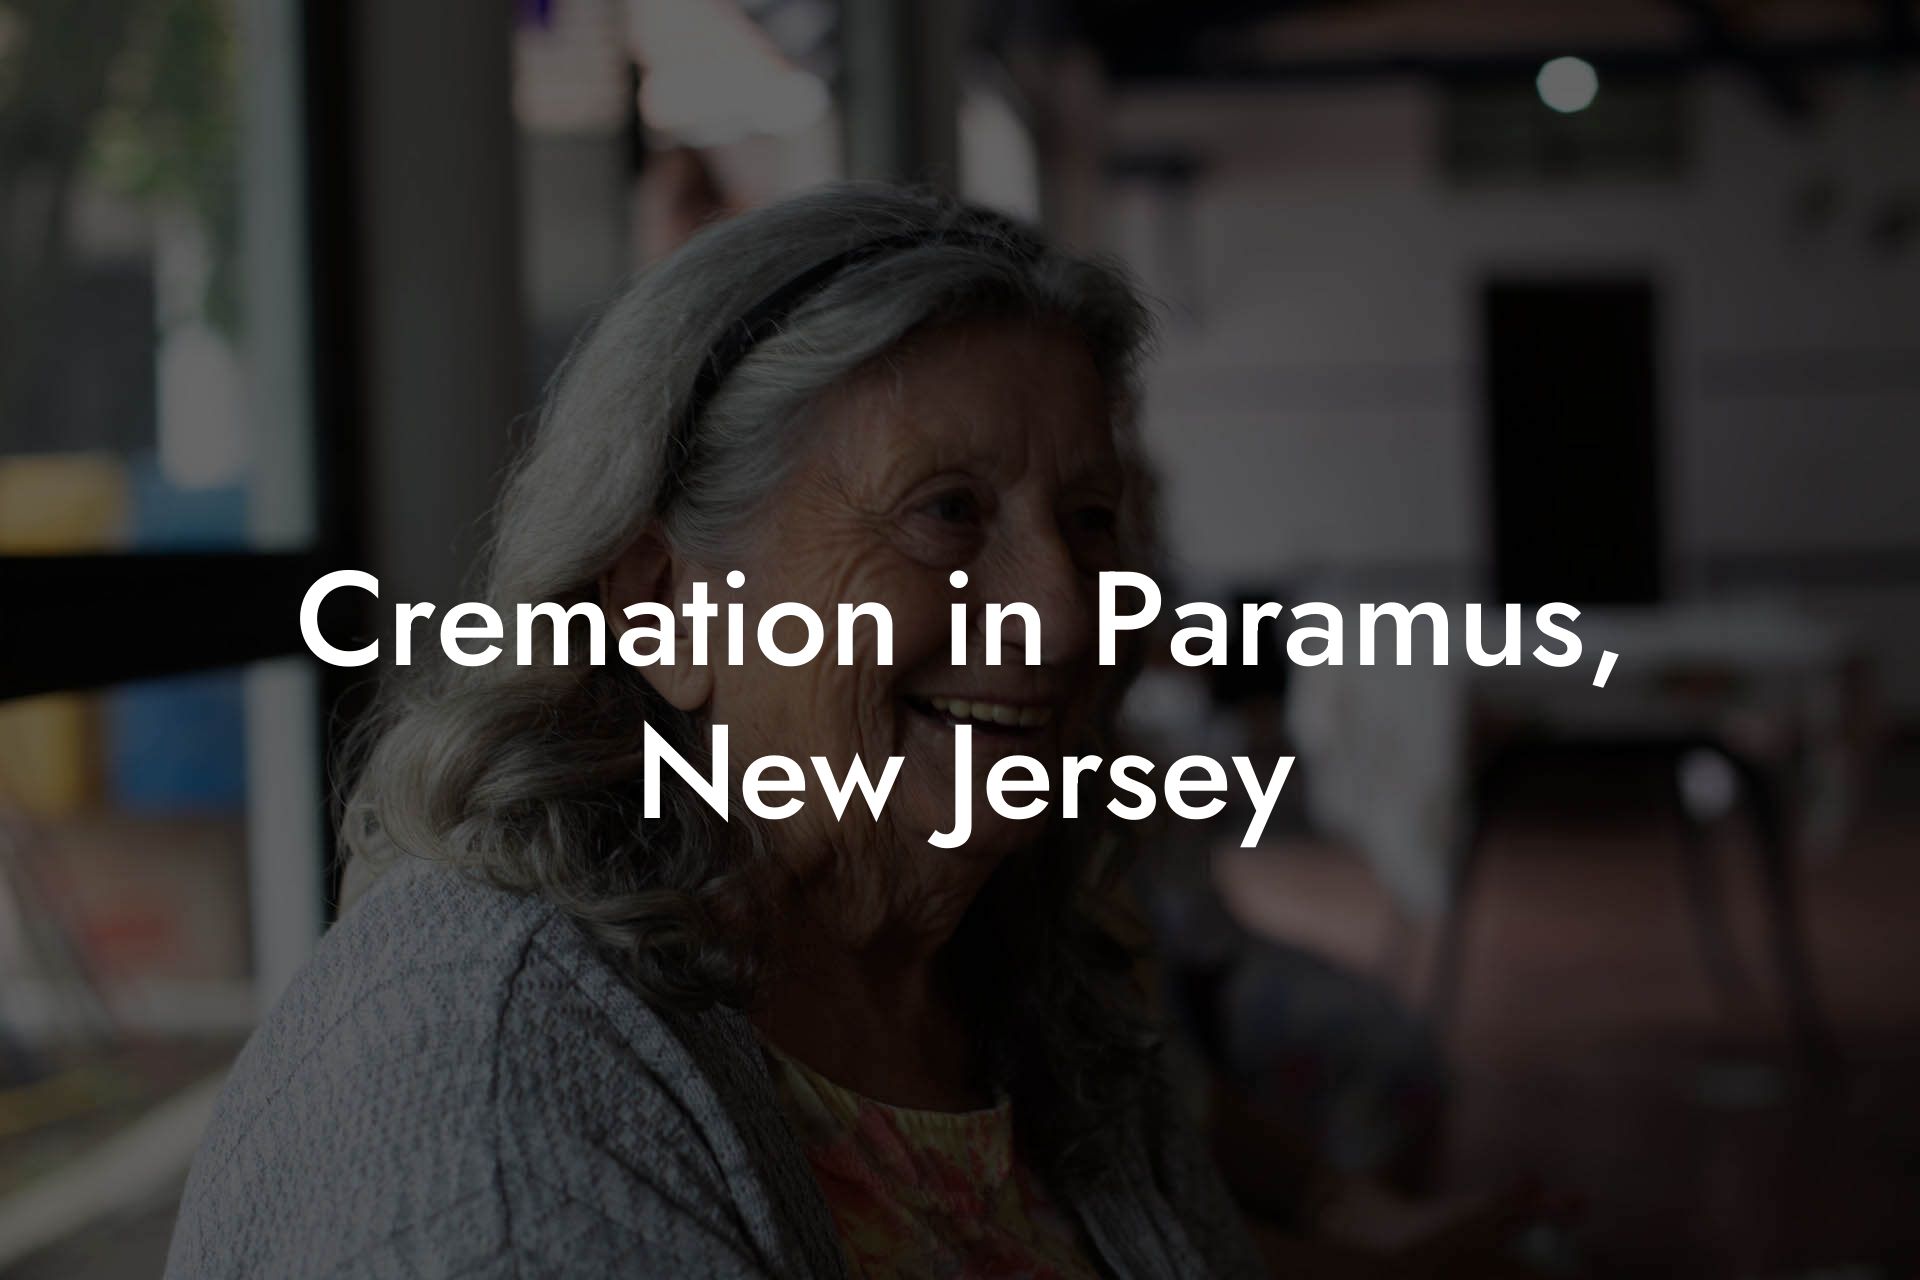 Cremation in Paramus, New Jersey